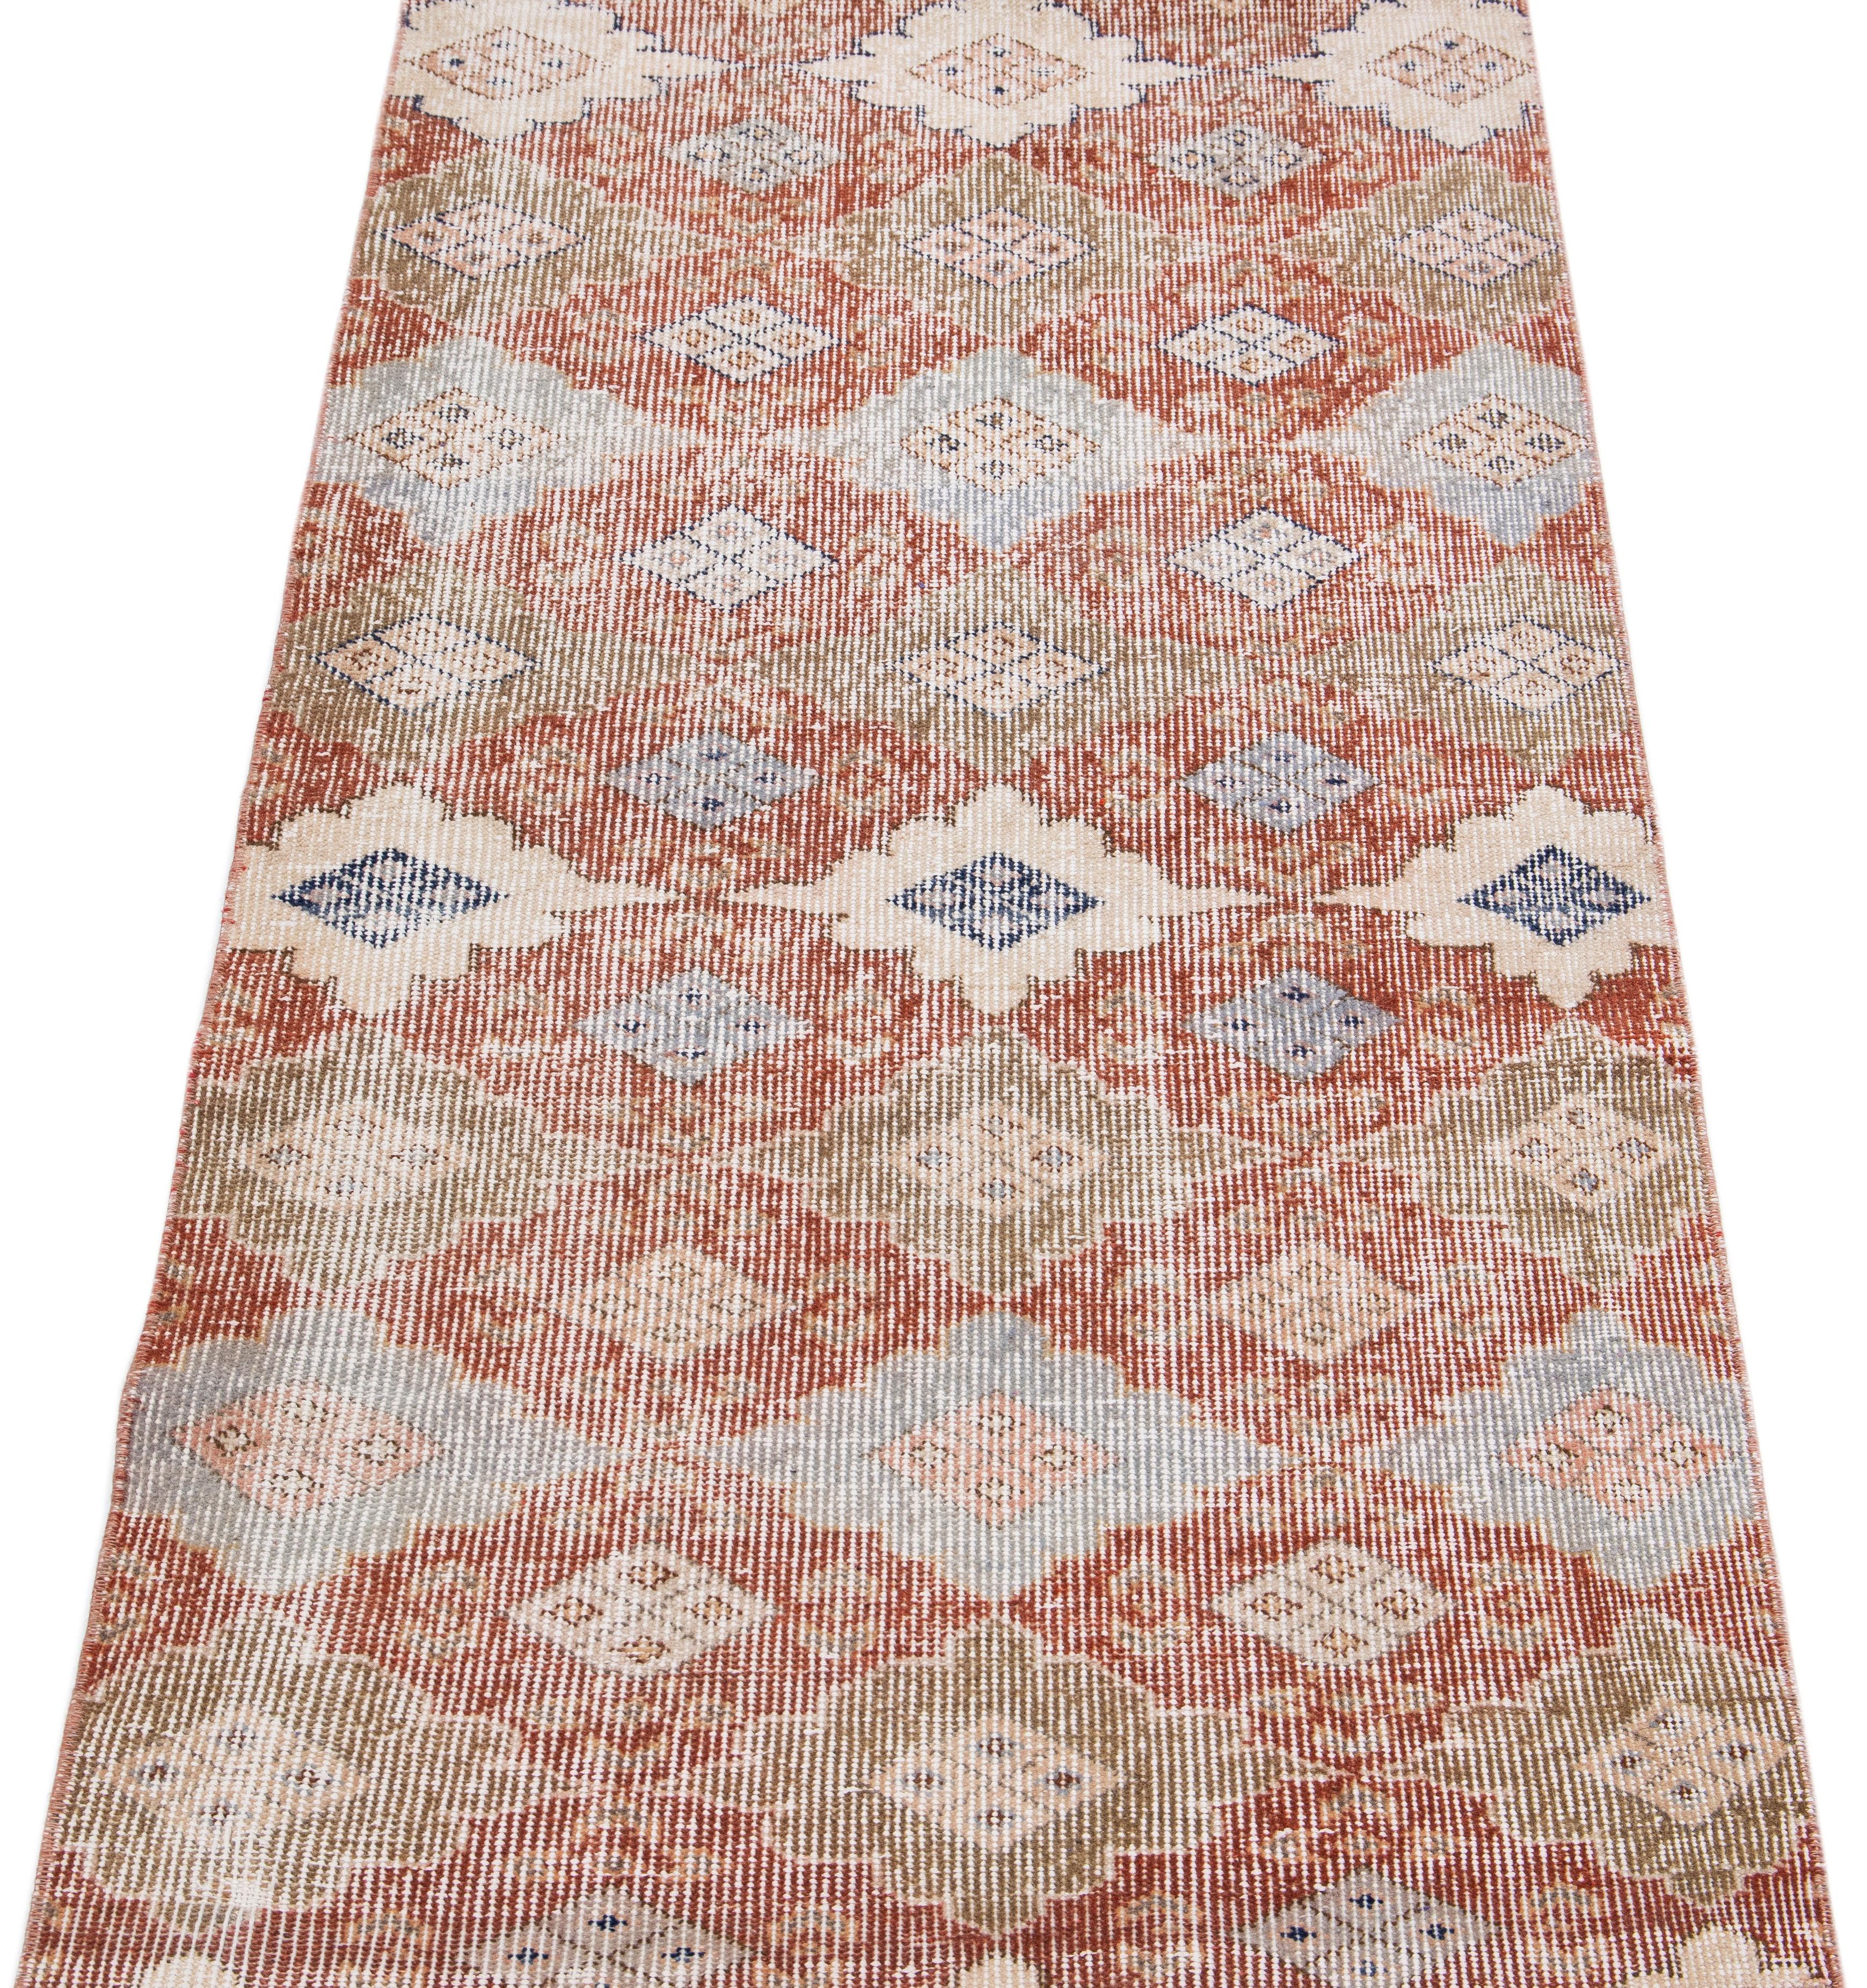 Beautiful vintage Turkish rug, hand knotted wool with a multi-color field in a gorgeous all-over geometric tribal design.

This rug measures: 2'8